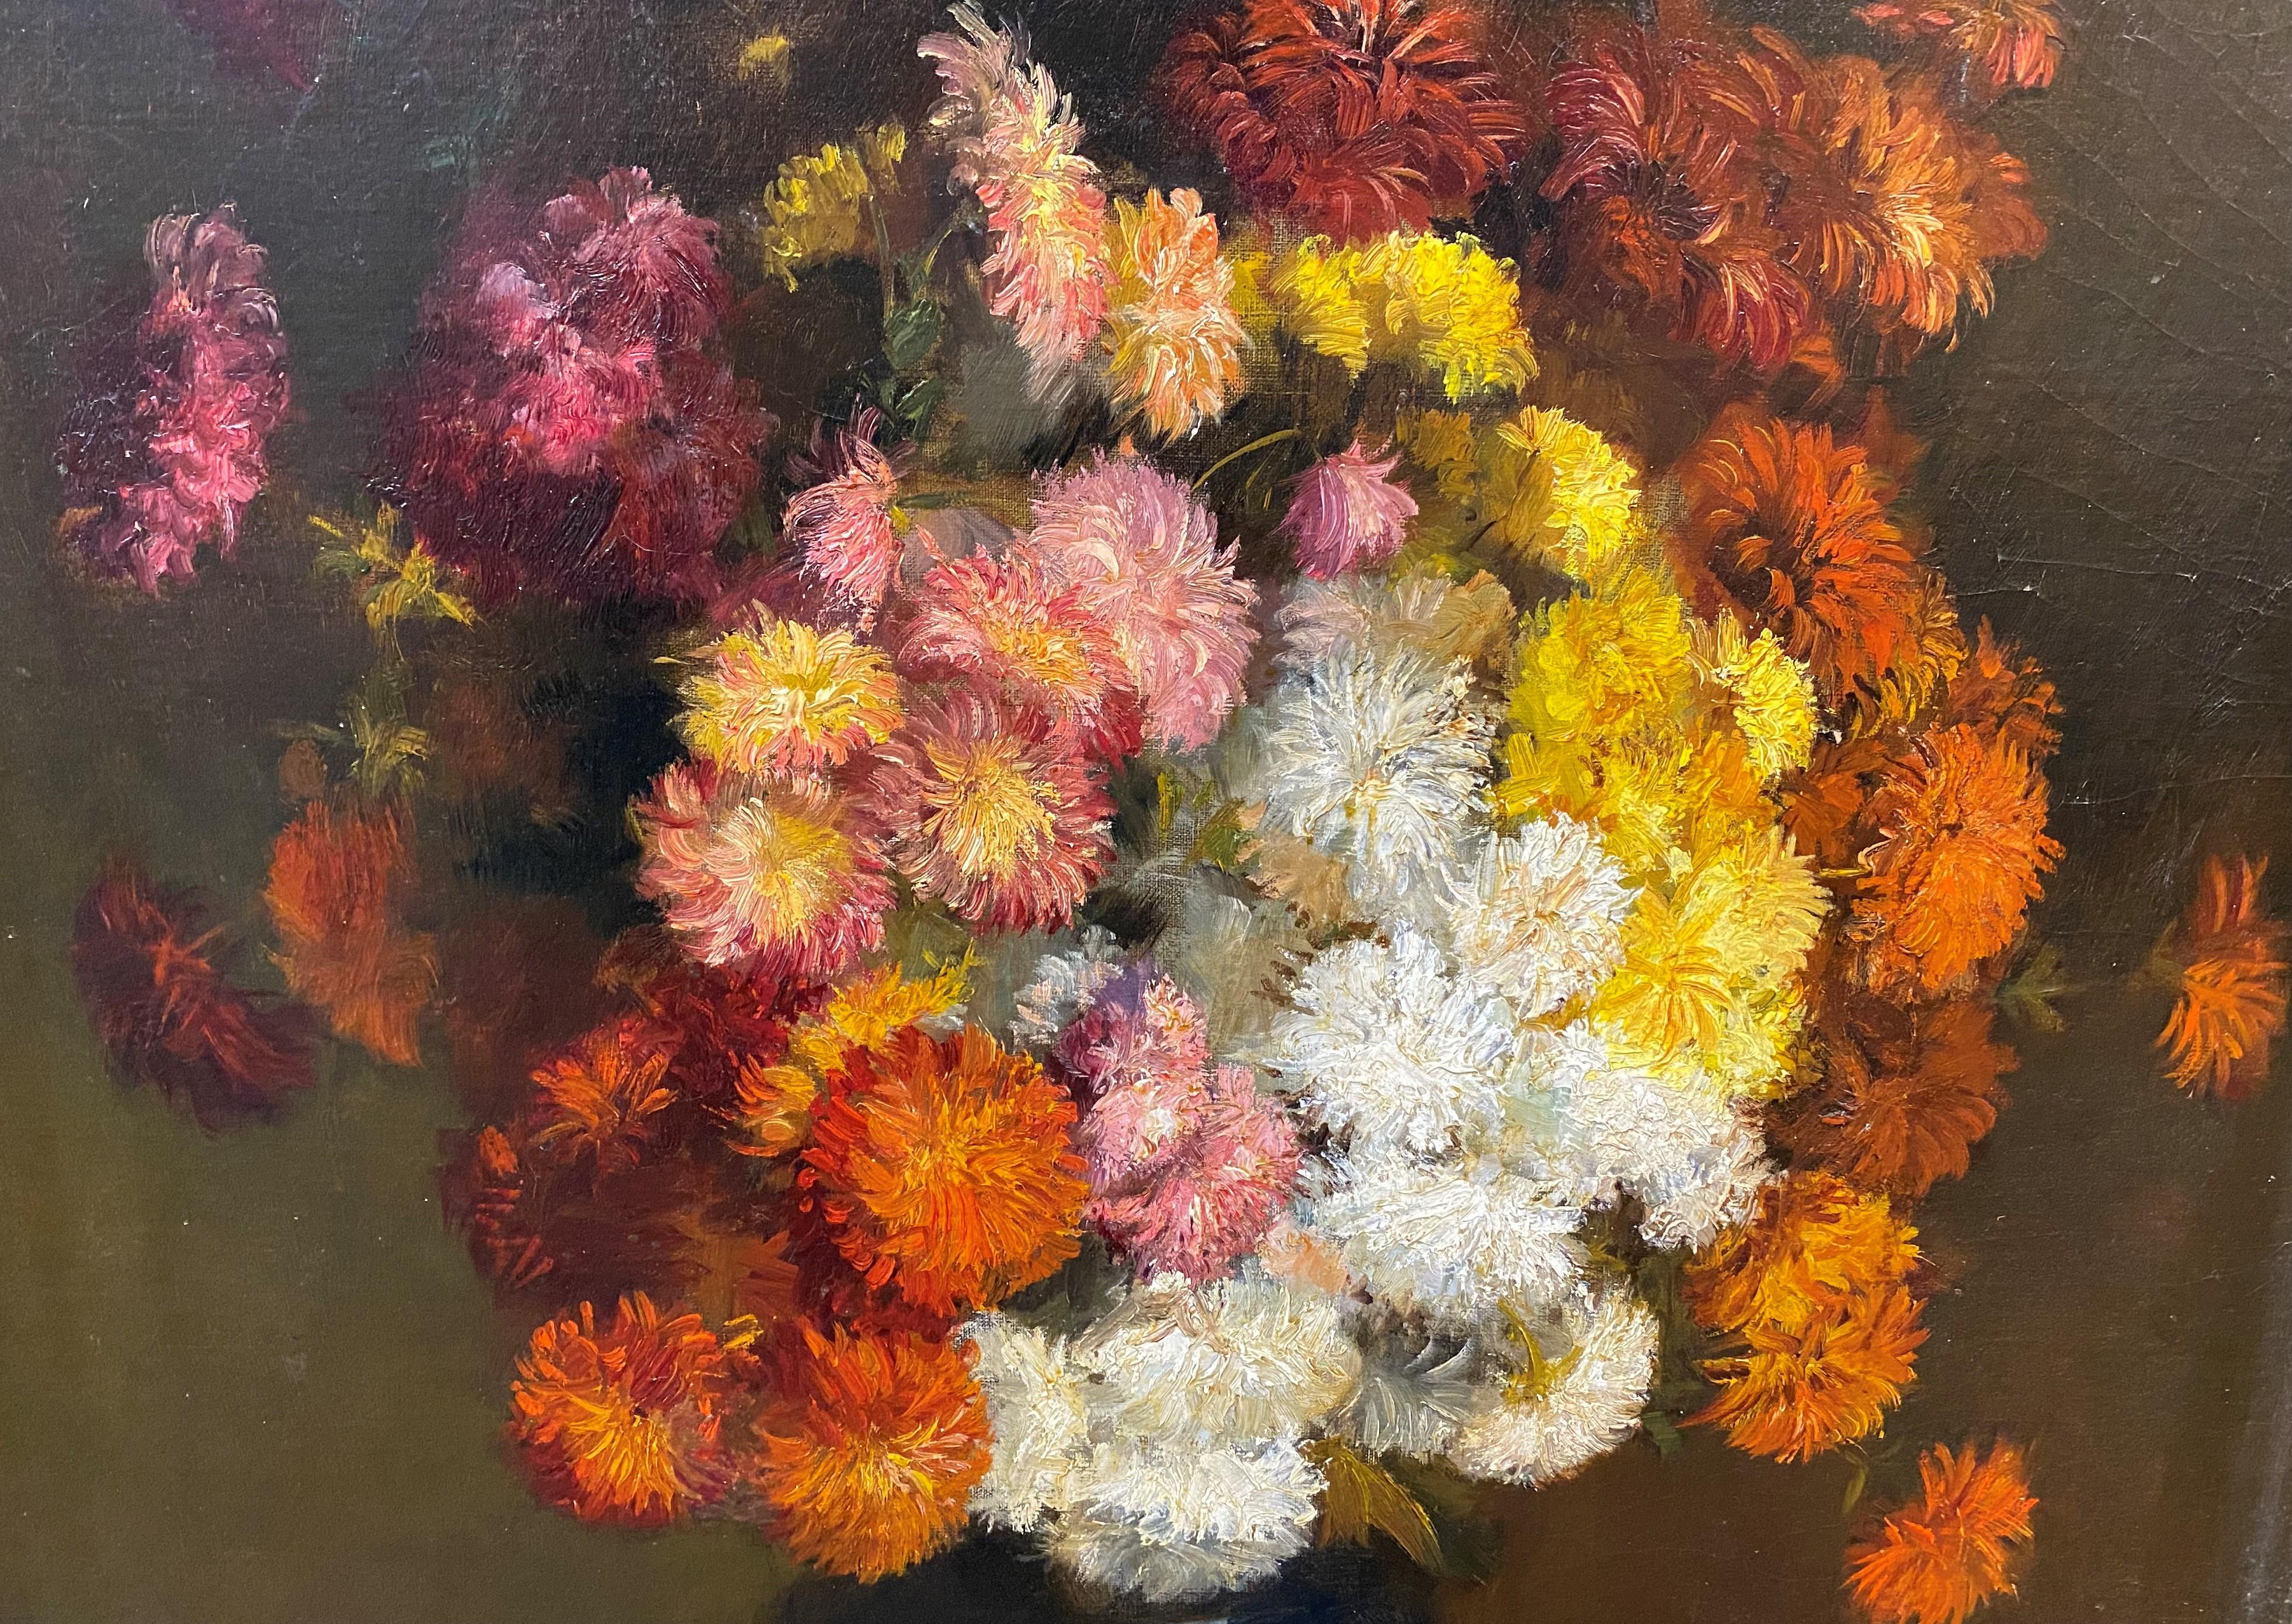 A fine 19th century still life of flowers by French artist Louis Mettling (1847-1904). Mettling was born in Dijon, Côte- d'Or, France to English parents. He studied at the École des Beaux-Arts in Lyons, was a pupil under Alexandre Cabanel, and